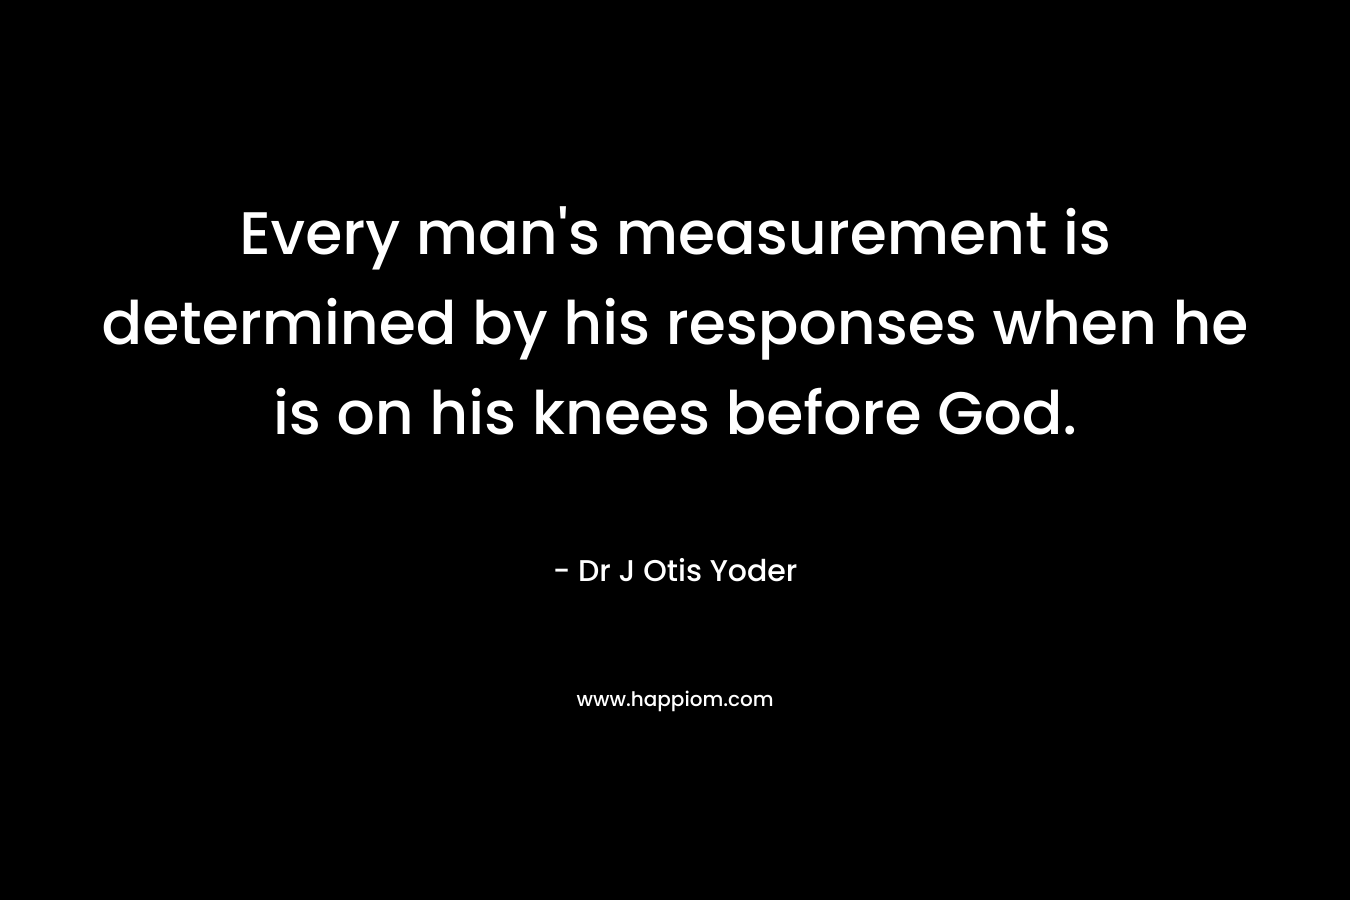 Every man's measurement is determined by his responses when he is on his knees before God.